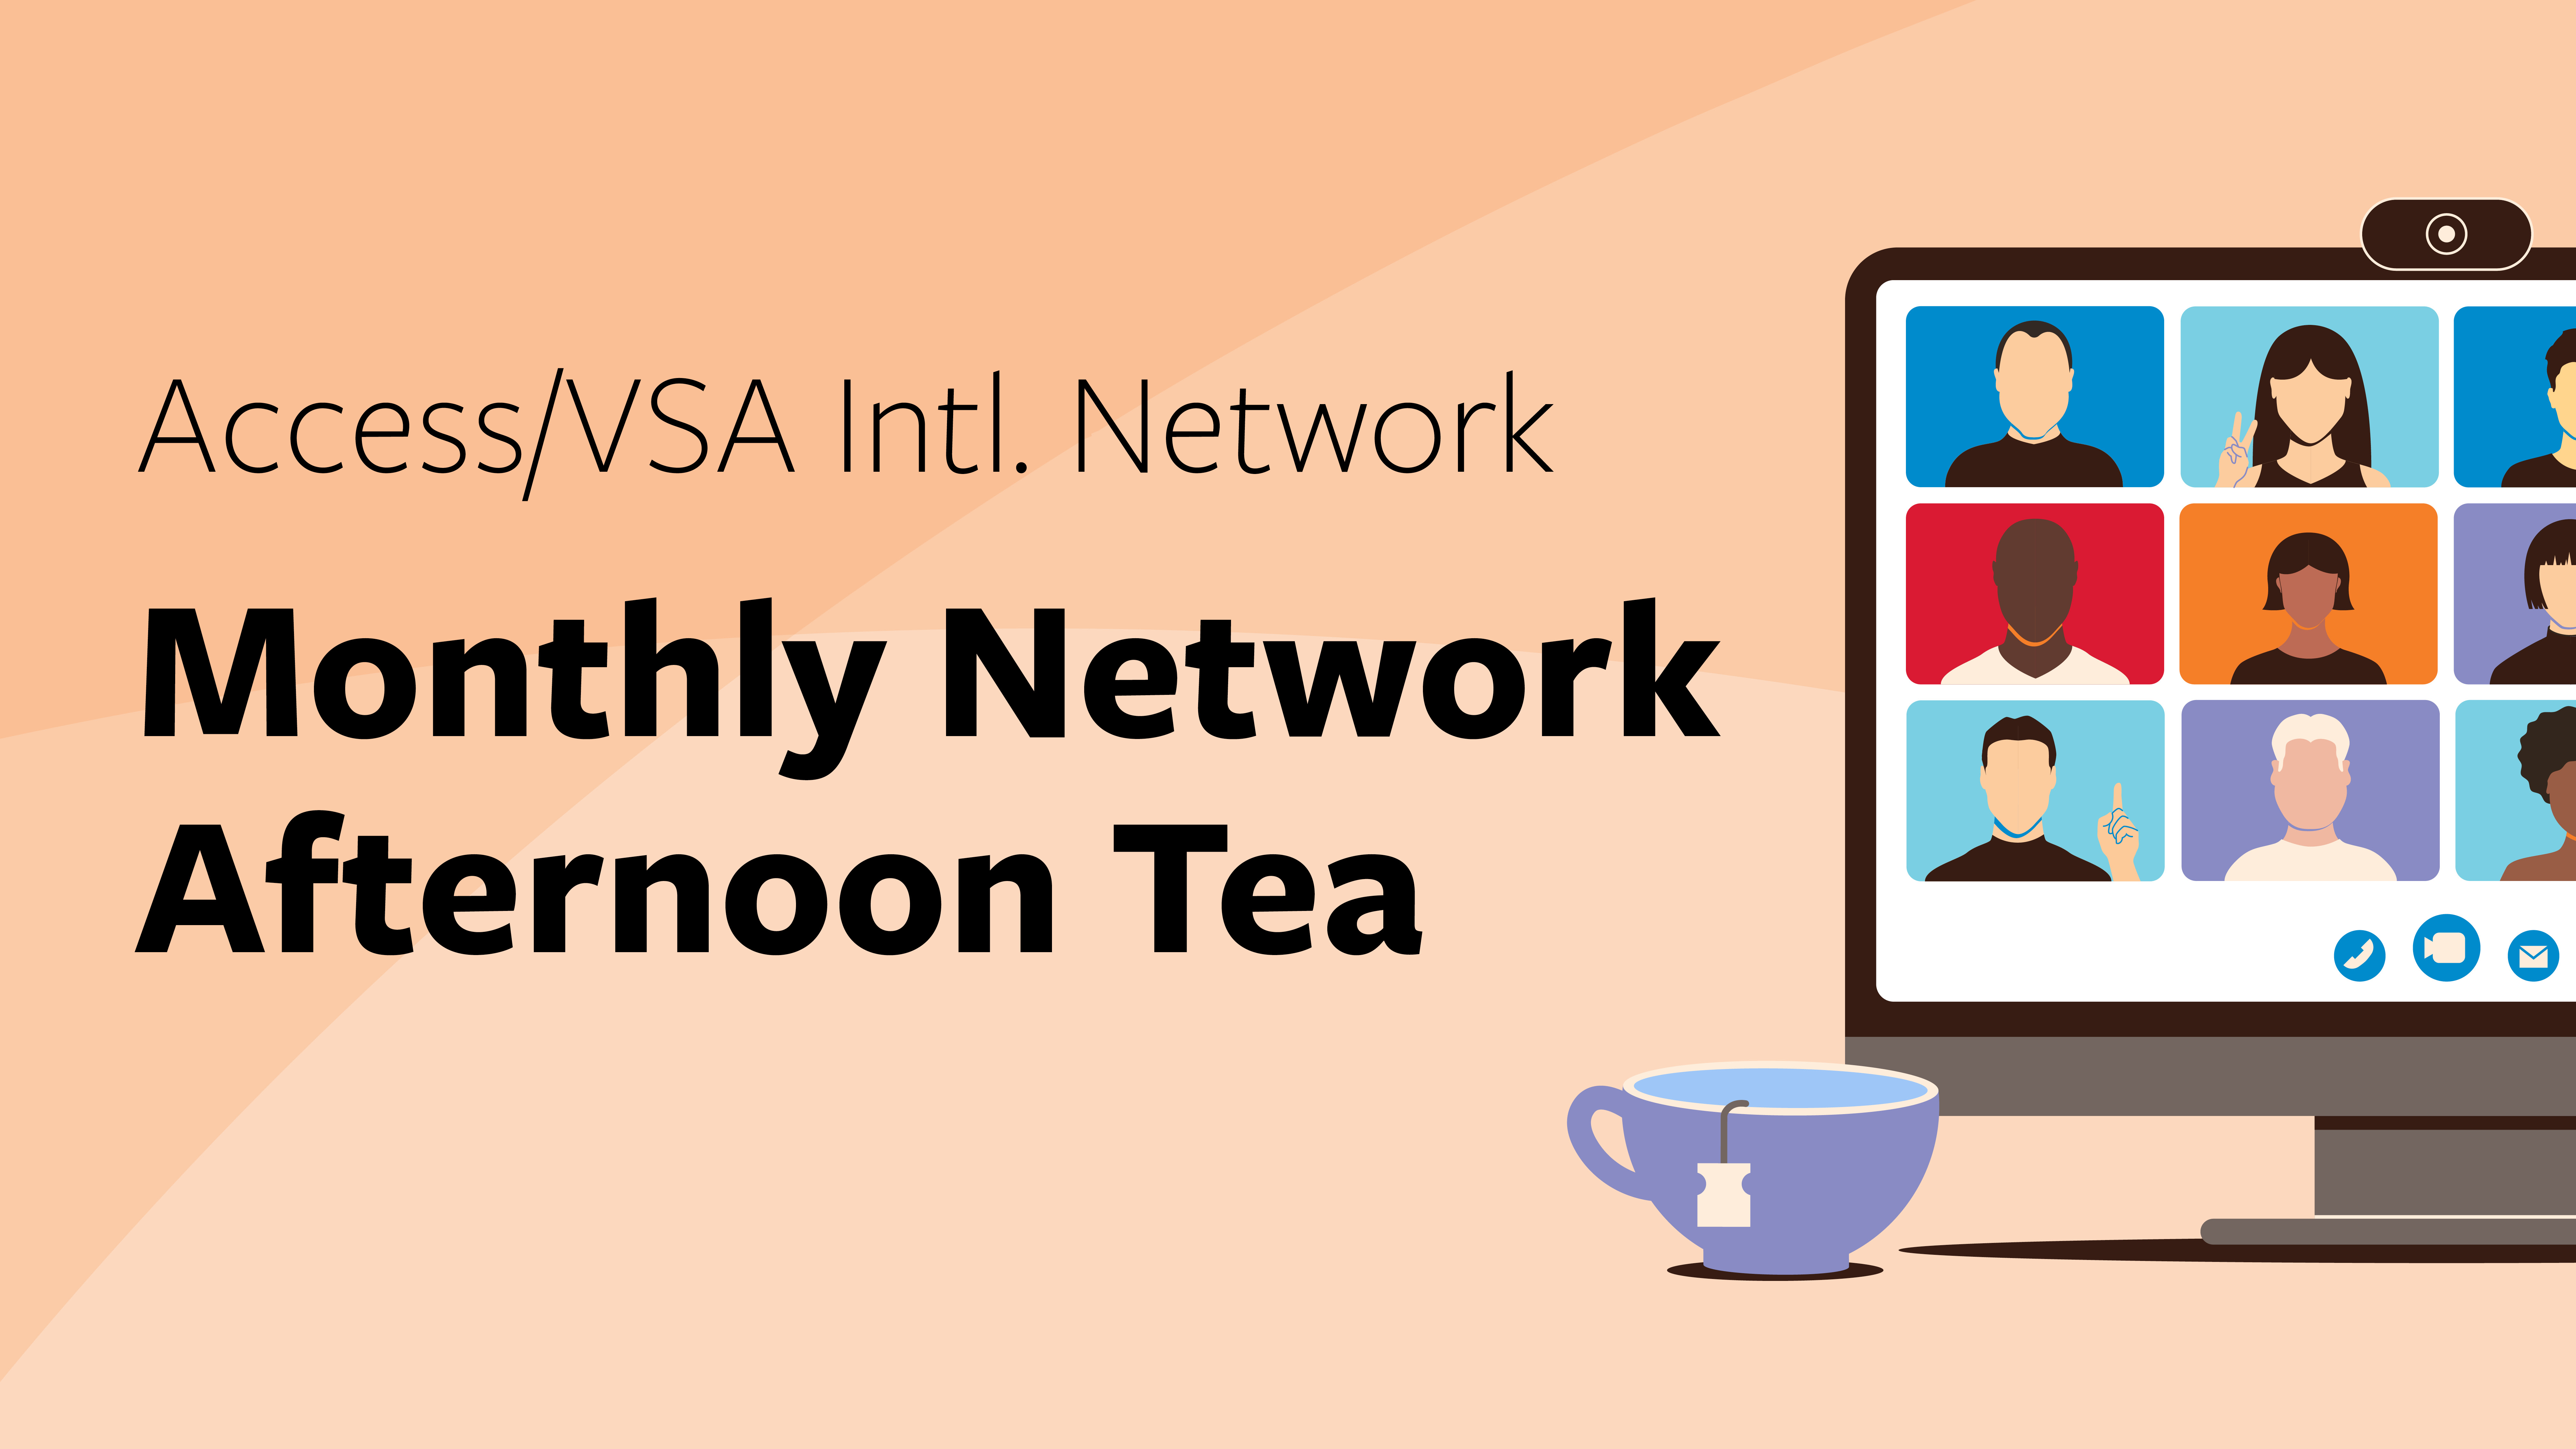 Graphic with an orange background and black text that reads “Access/VSA Intl. Network Monthly Network Afternoon Tea with a colorful graphic of people on a zoom call on the right side.